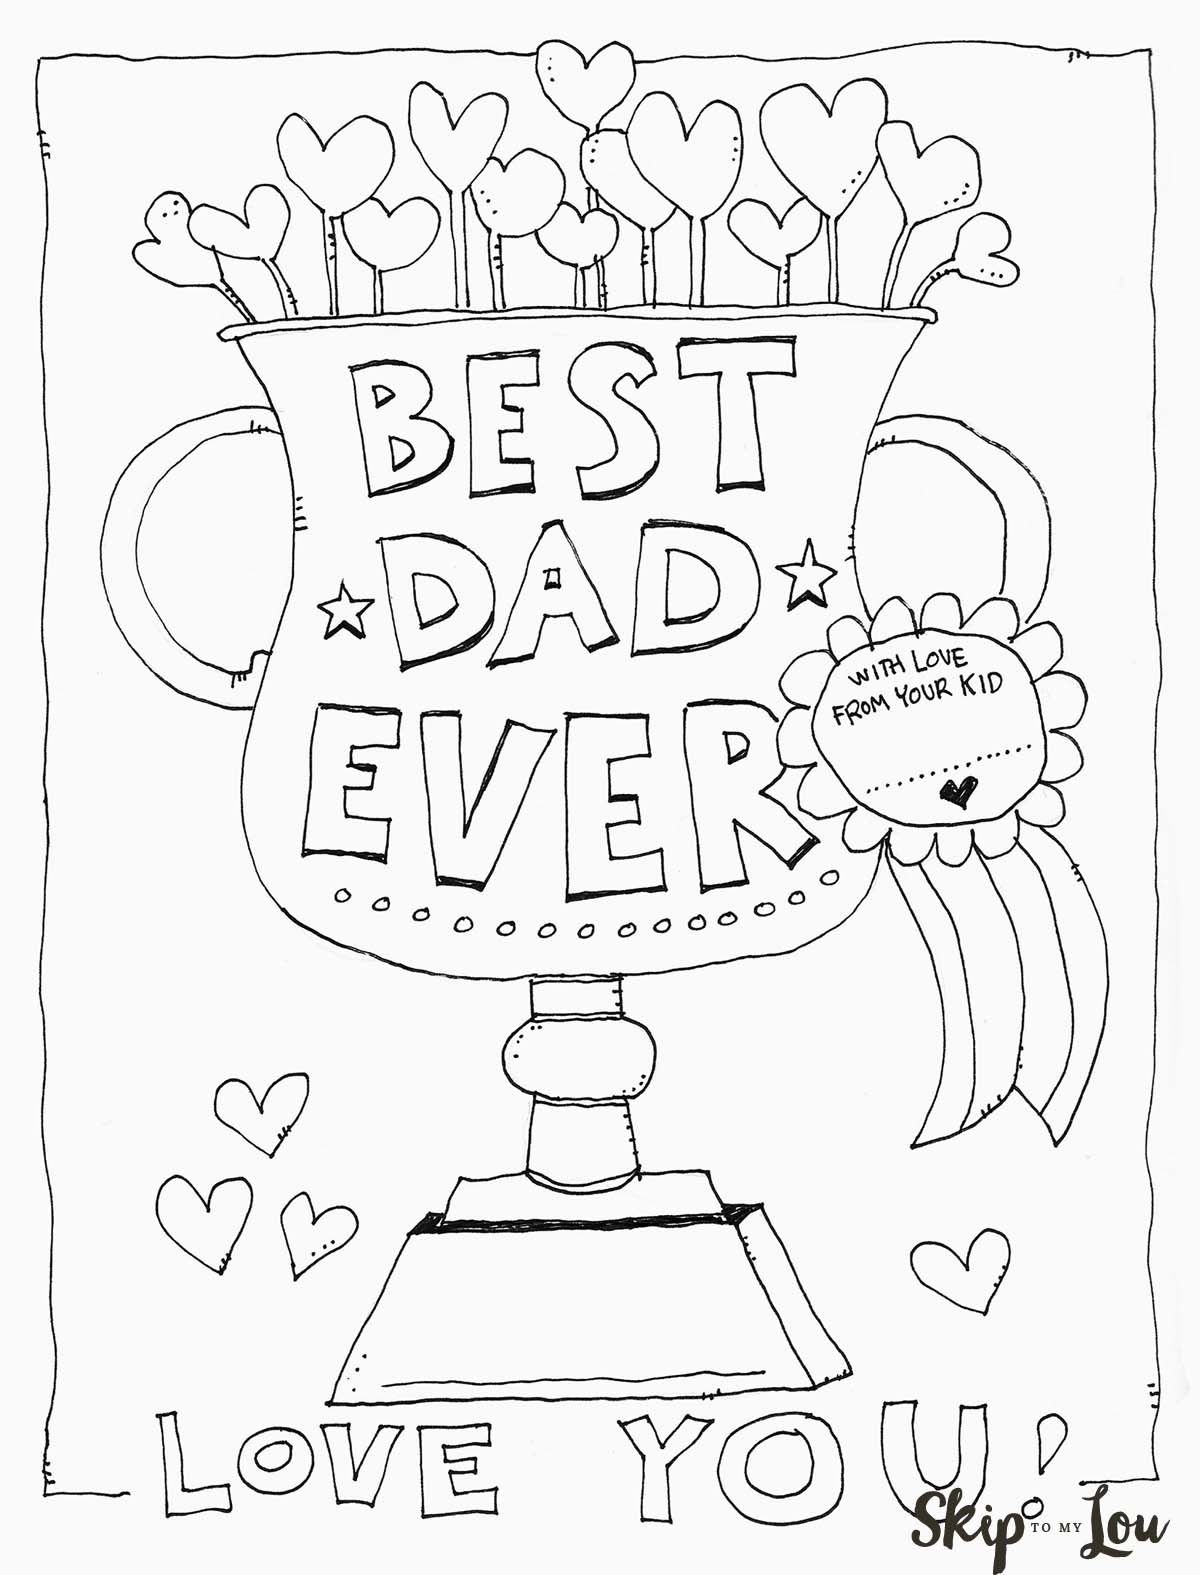 Free Printable Fathers Day Cards For Preschoolers | Free Printable